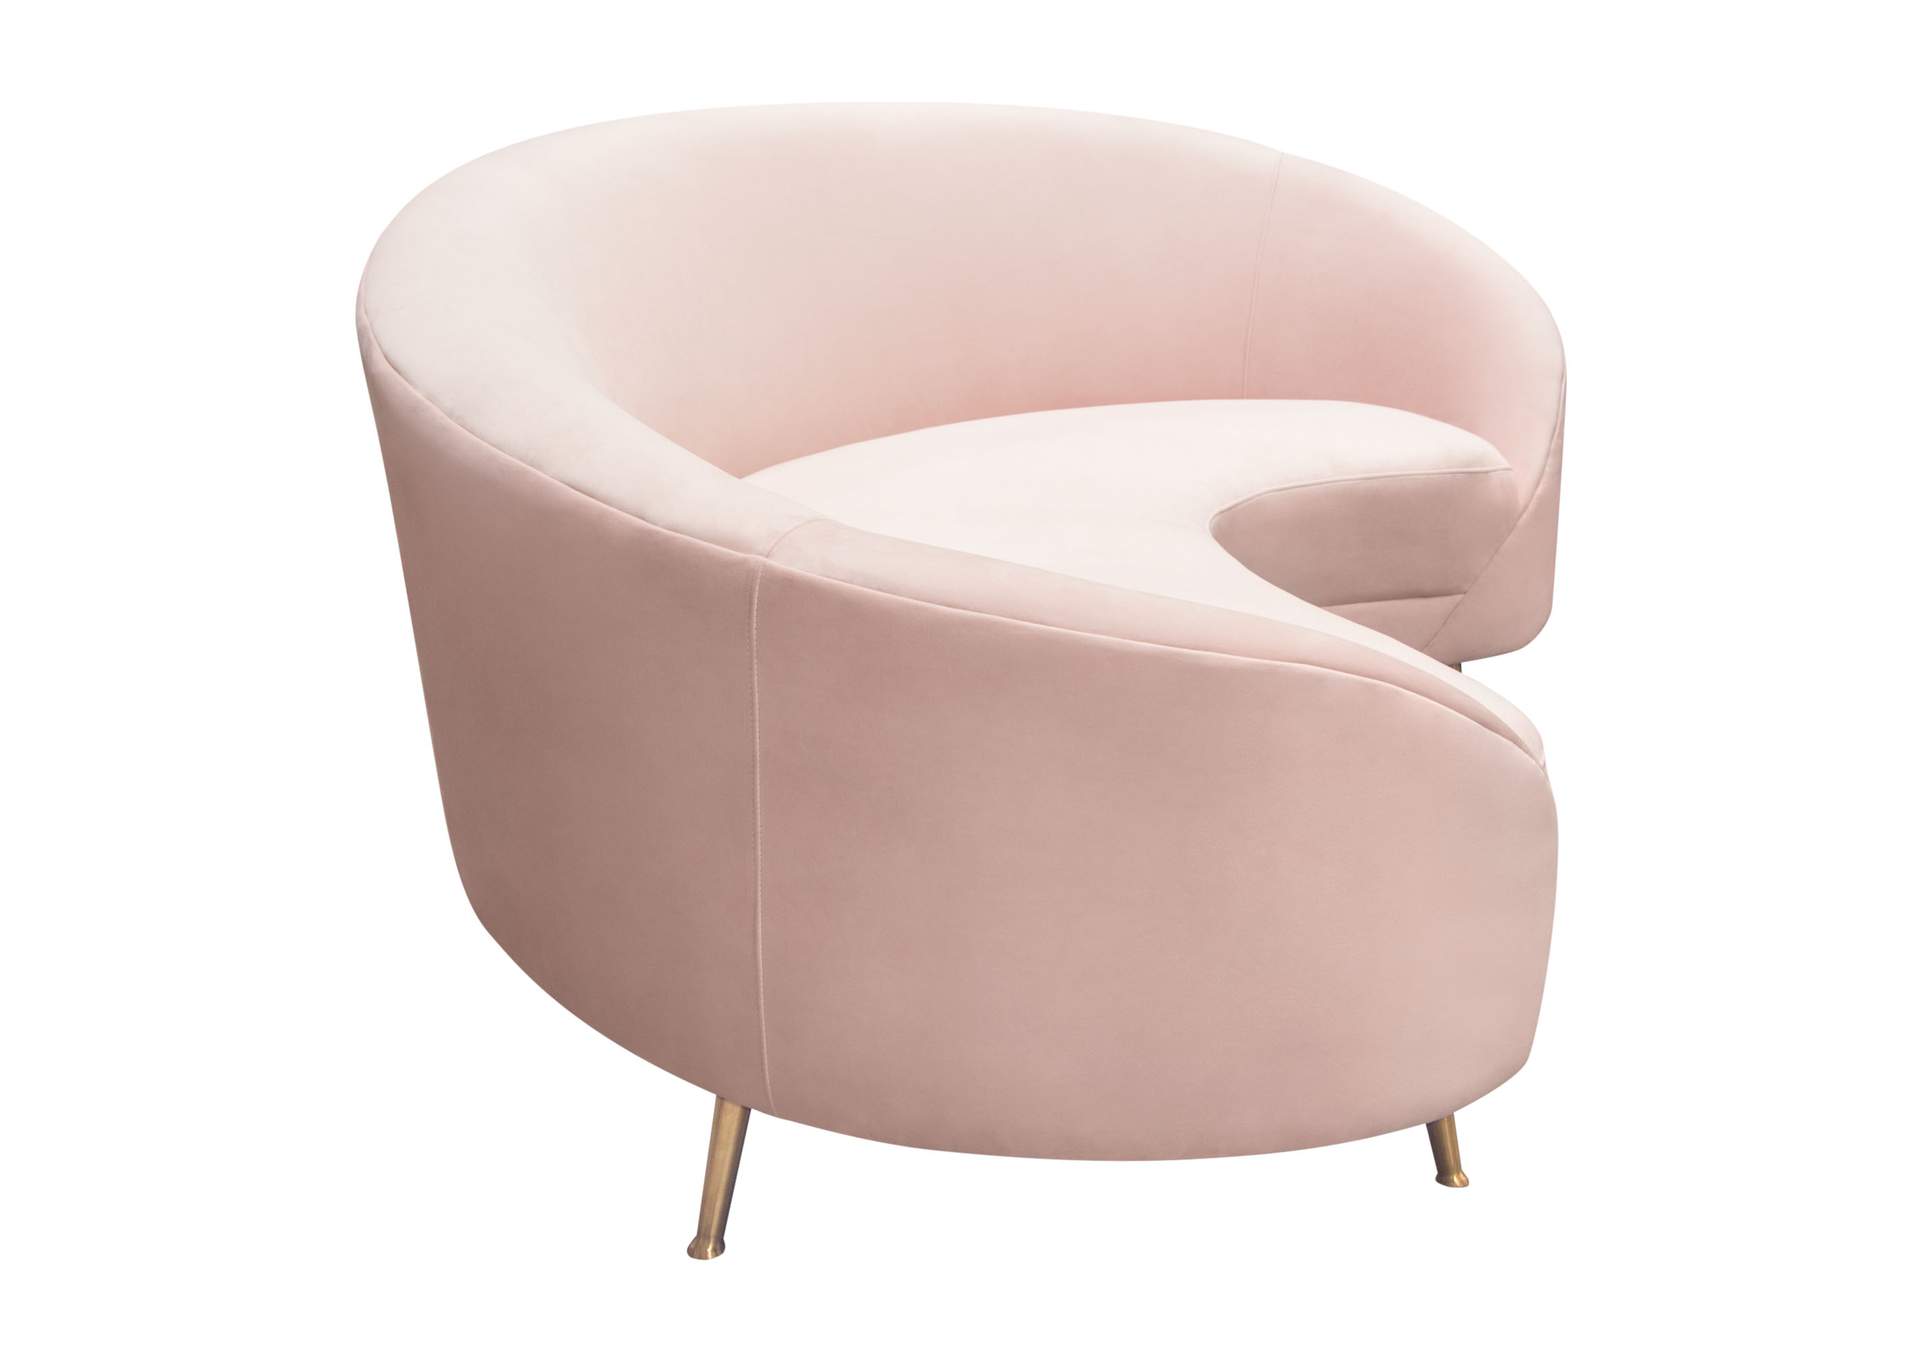 Celine Curved Sofa with Contoured Back in Blush Pink Velvet and Gold Metal Legs by Diamond Sofa,Diamond Sofa